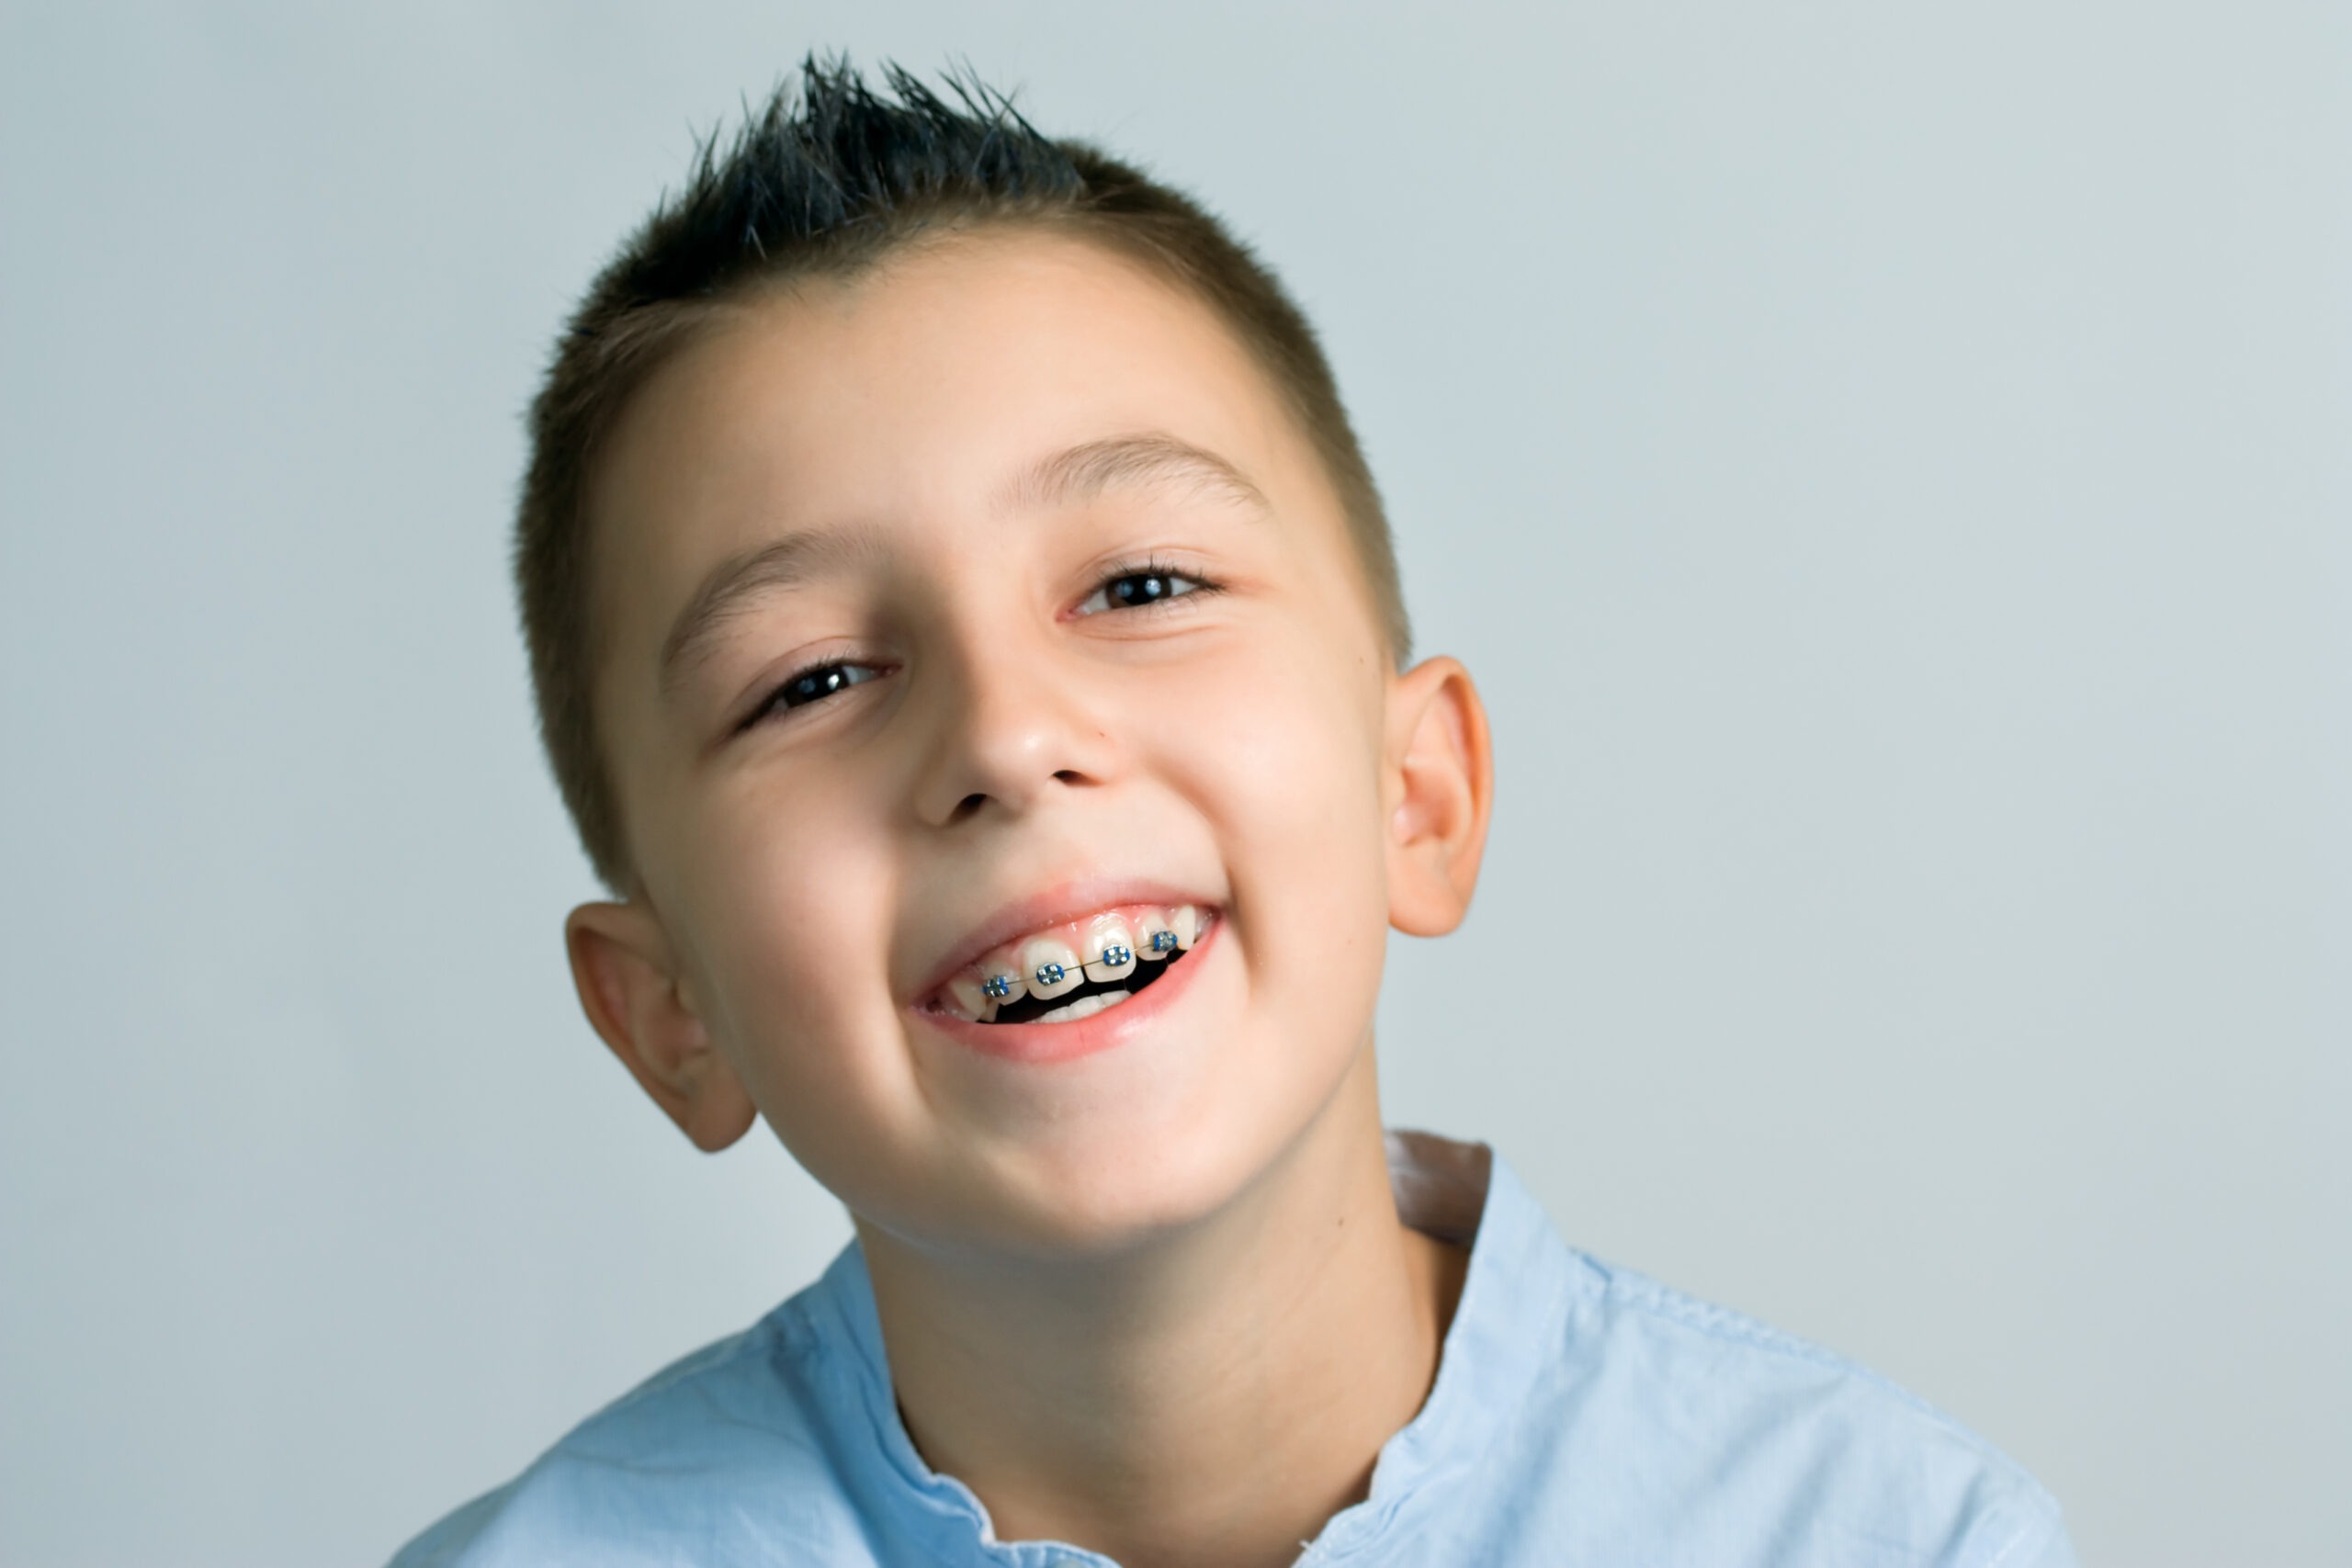 Feeling like you’ve missed the orthodontic treatment window? Champlain Orthodontics answers the question, “When’s the best age to get braces?”